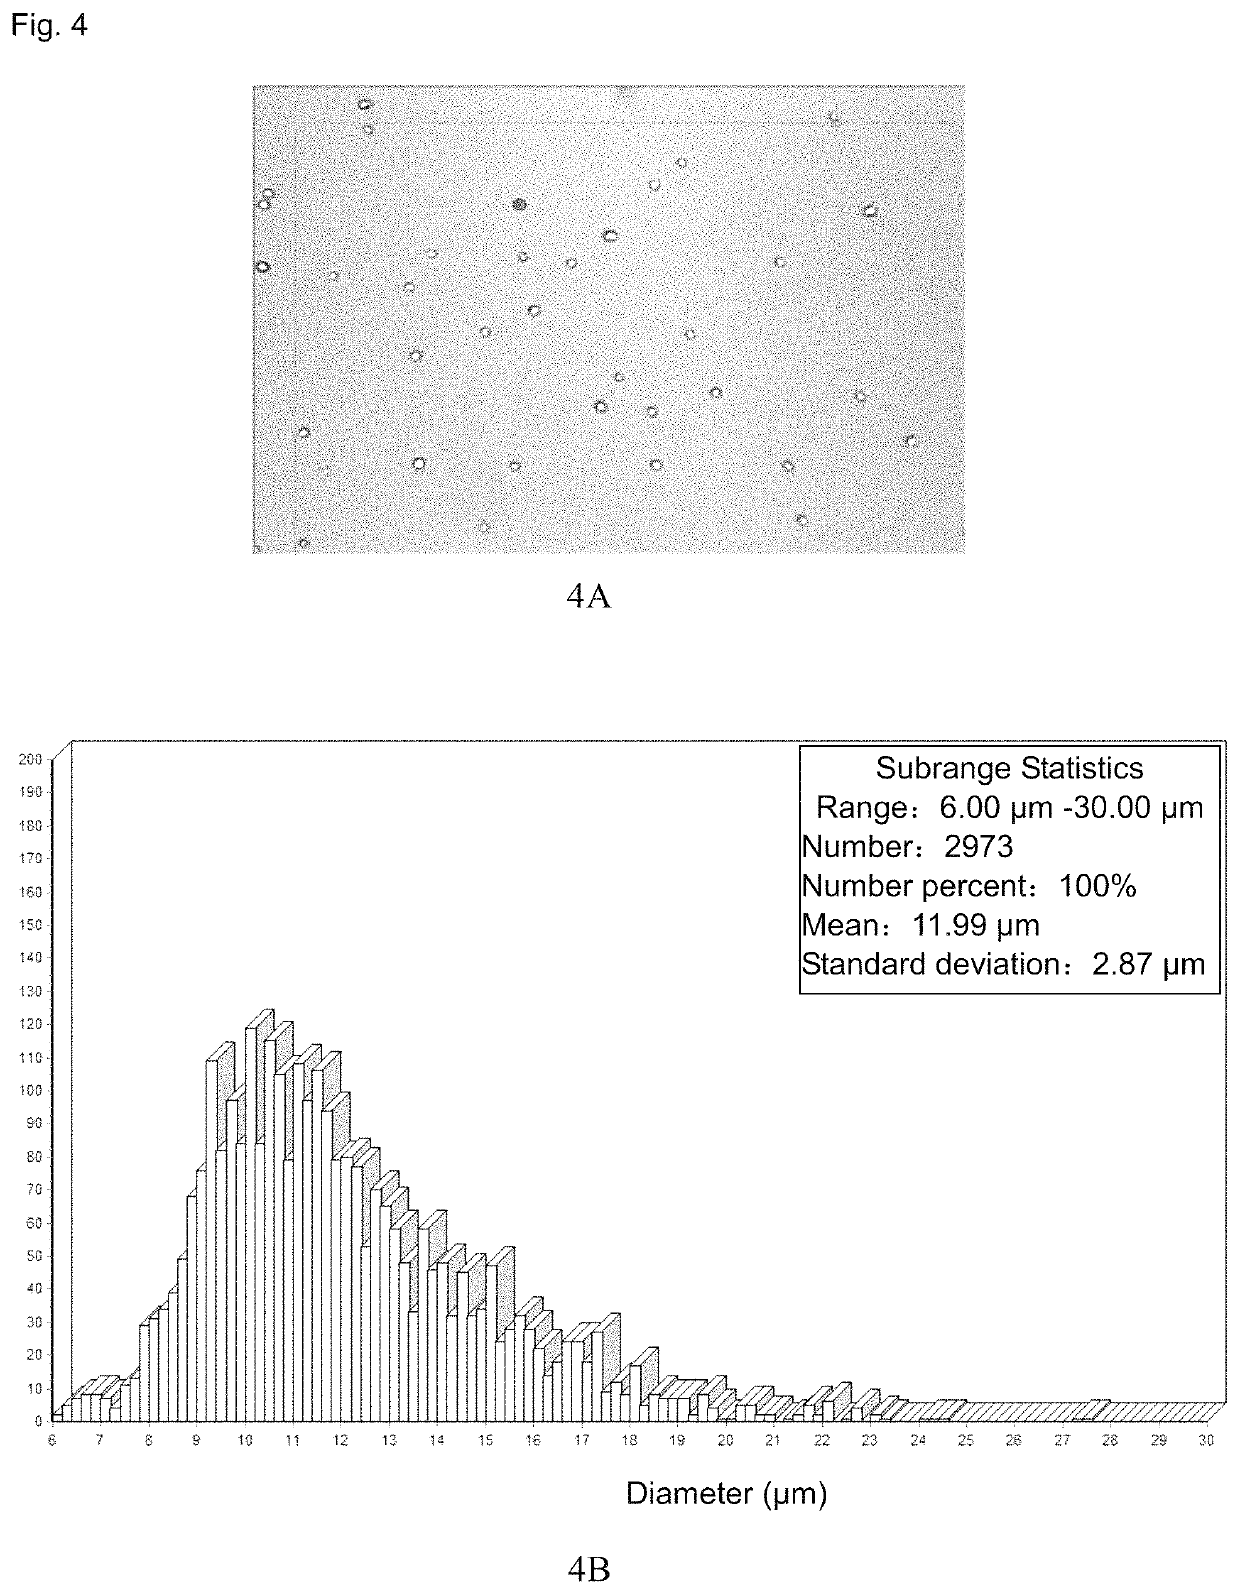 Serum-free culture medium and preparation method and application therefor